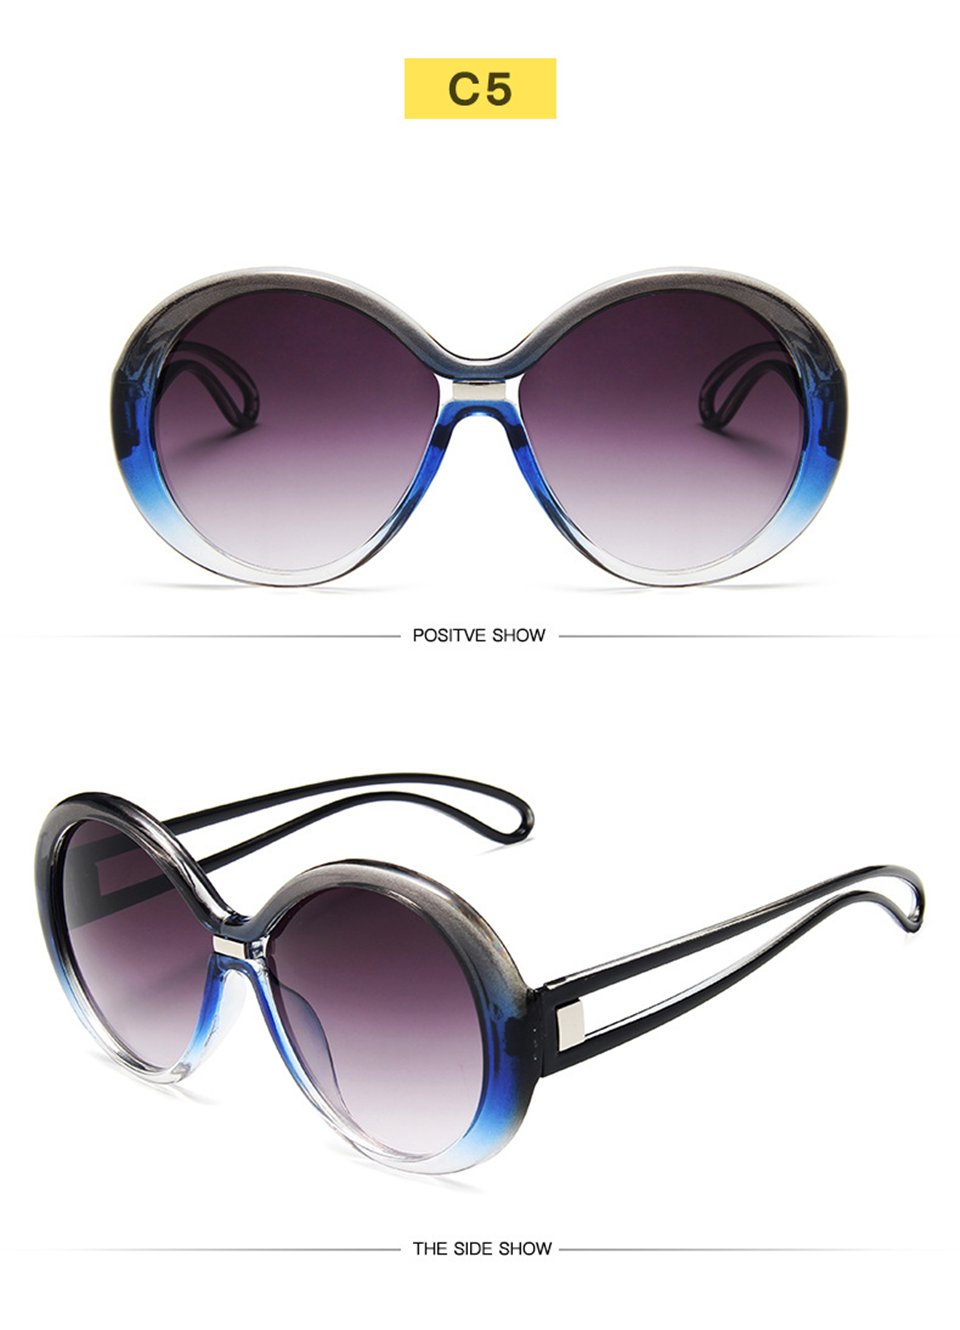 New Stylish Round Gradient Sunglasses For Women-Unique and Classy